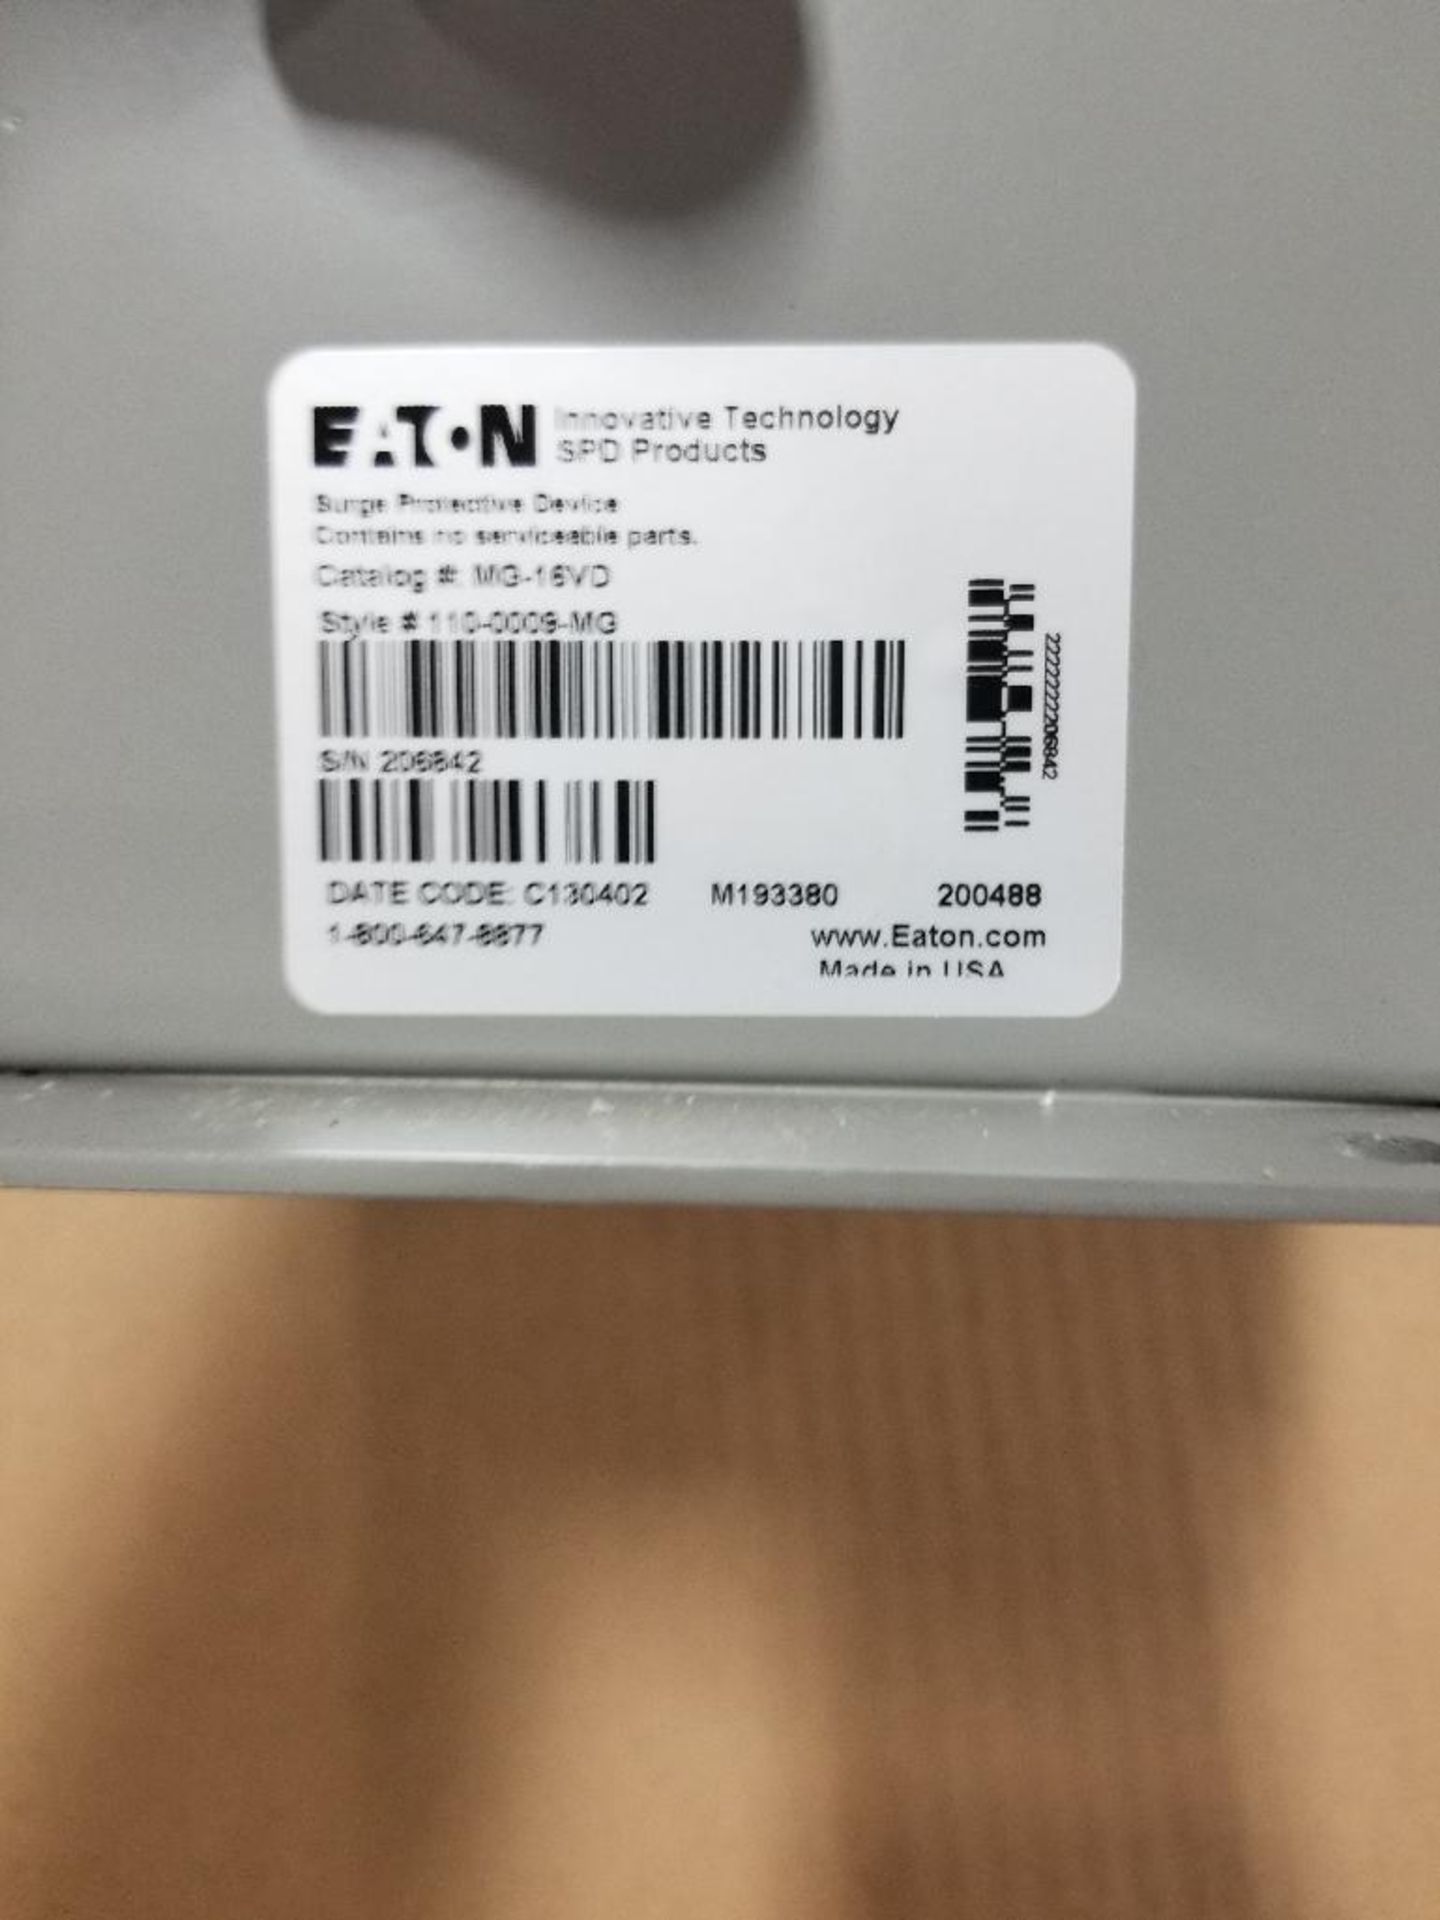 Eaton surge protection device. Model MG-16VD. New in box. - Image 4 of 6